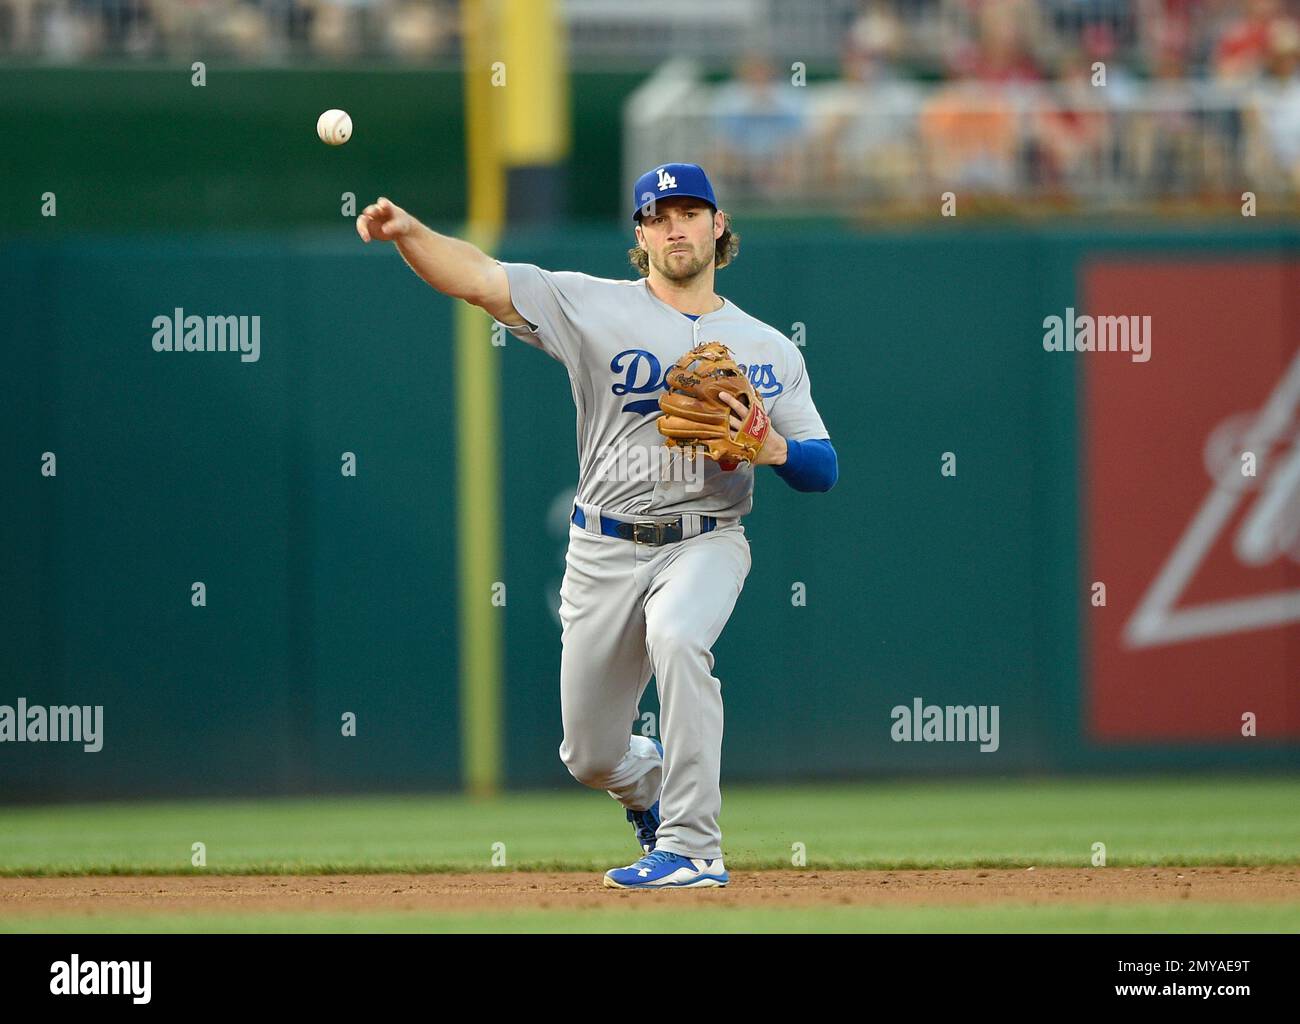 Los Angeles Dodgers shortstop Charlie Culberson throws to first to